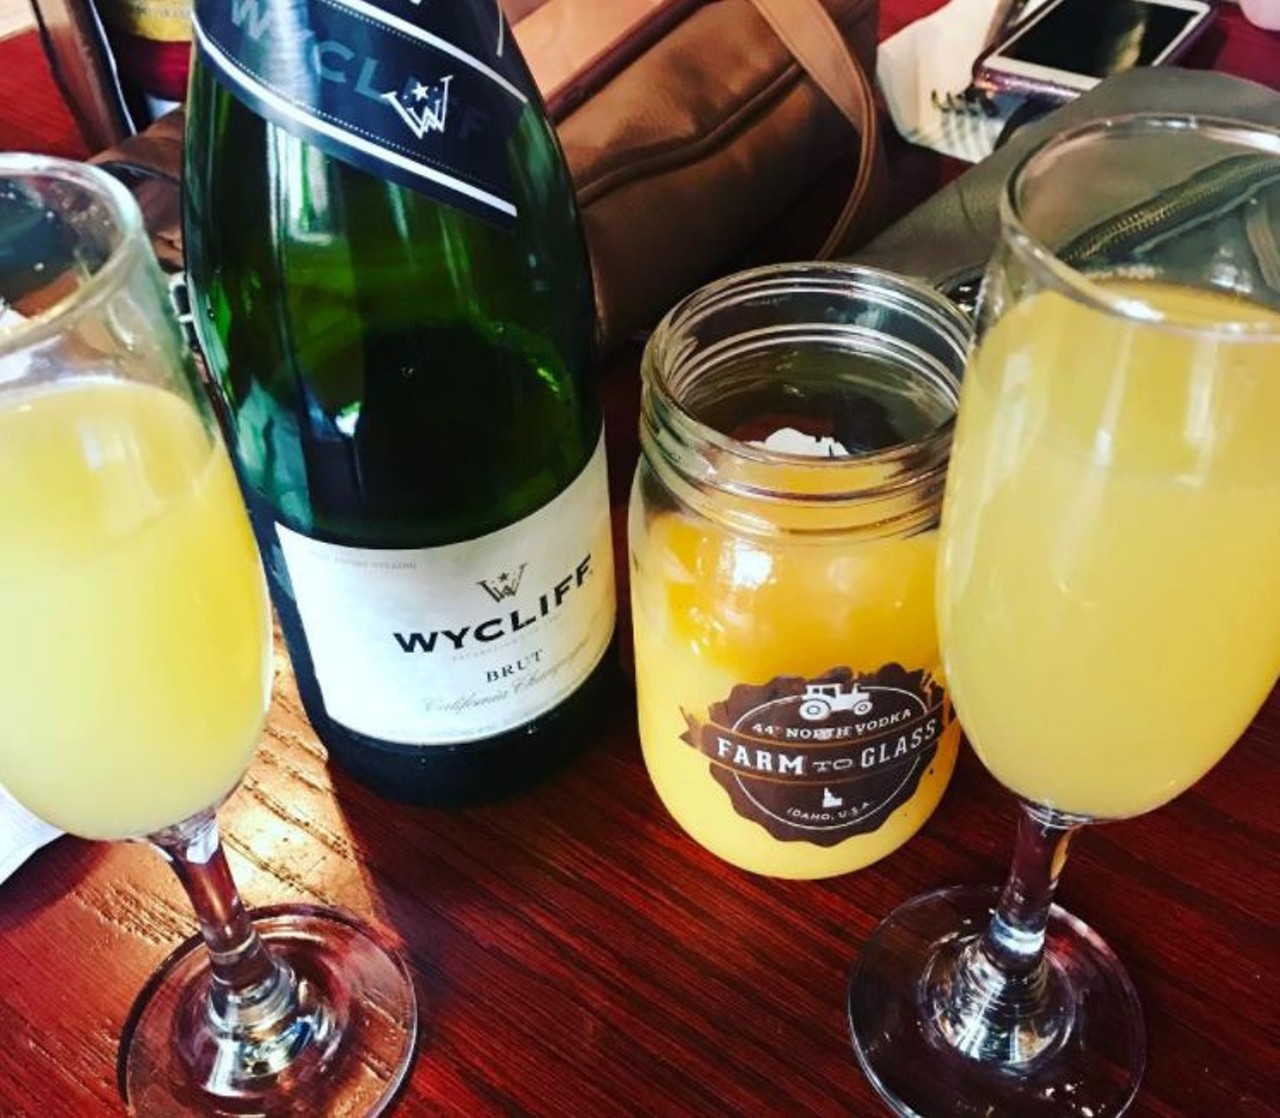 Avenue Gastrobar
Check out this pub hub every Saturday and Sunday from 11 a.m. to 3 p.m. to get mimosas for $12.95.    
13 S. Orange Ave., 407-839-5039
Photo via brandiraefitness/Instagram